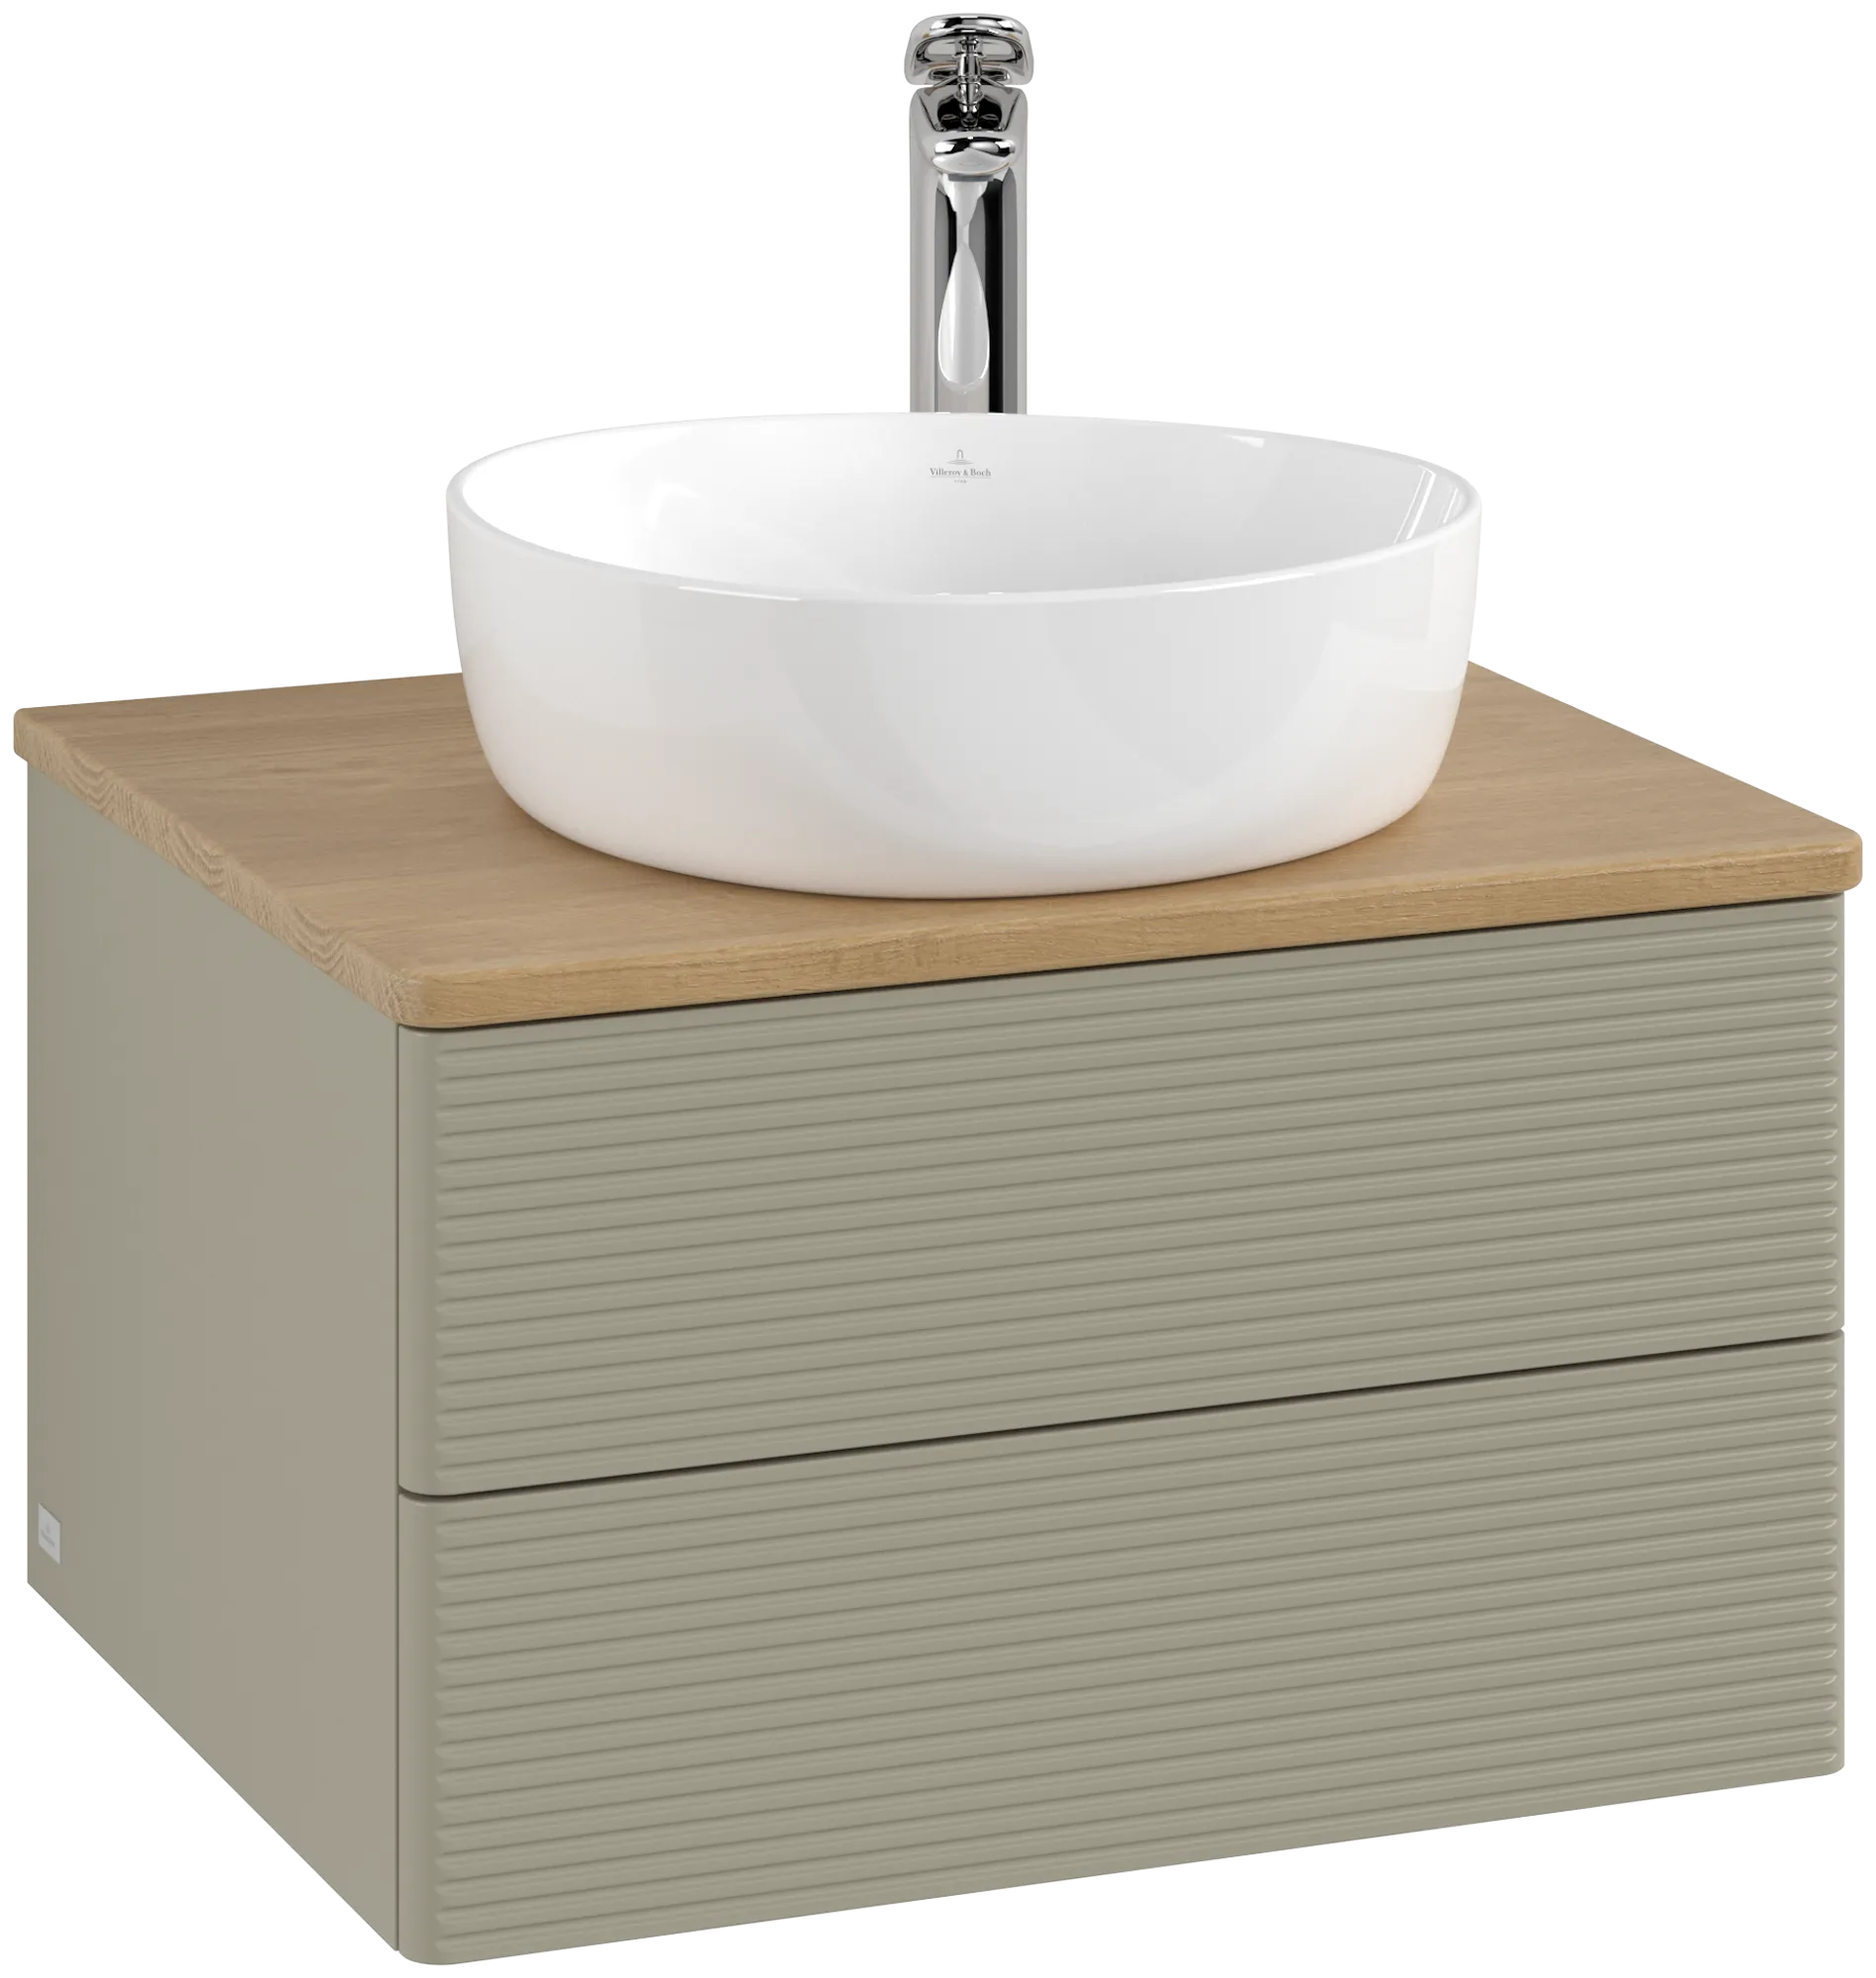 Picture of VILLEROY BOCH Antao Vanity unit, with lighting, 2 pull-out compartments, 600 x 360 x 500 mm, Front with grain texture, Stone Grey Matt Lacquer / Honey Oak #L18151HK